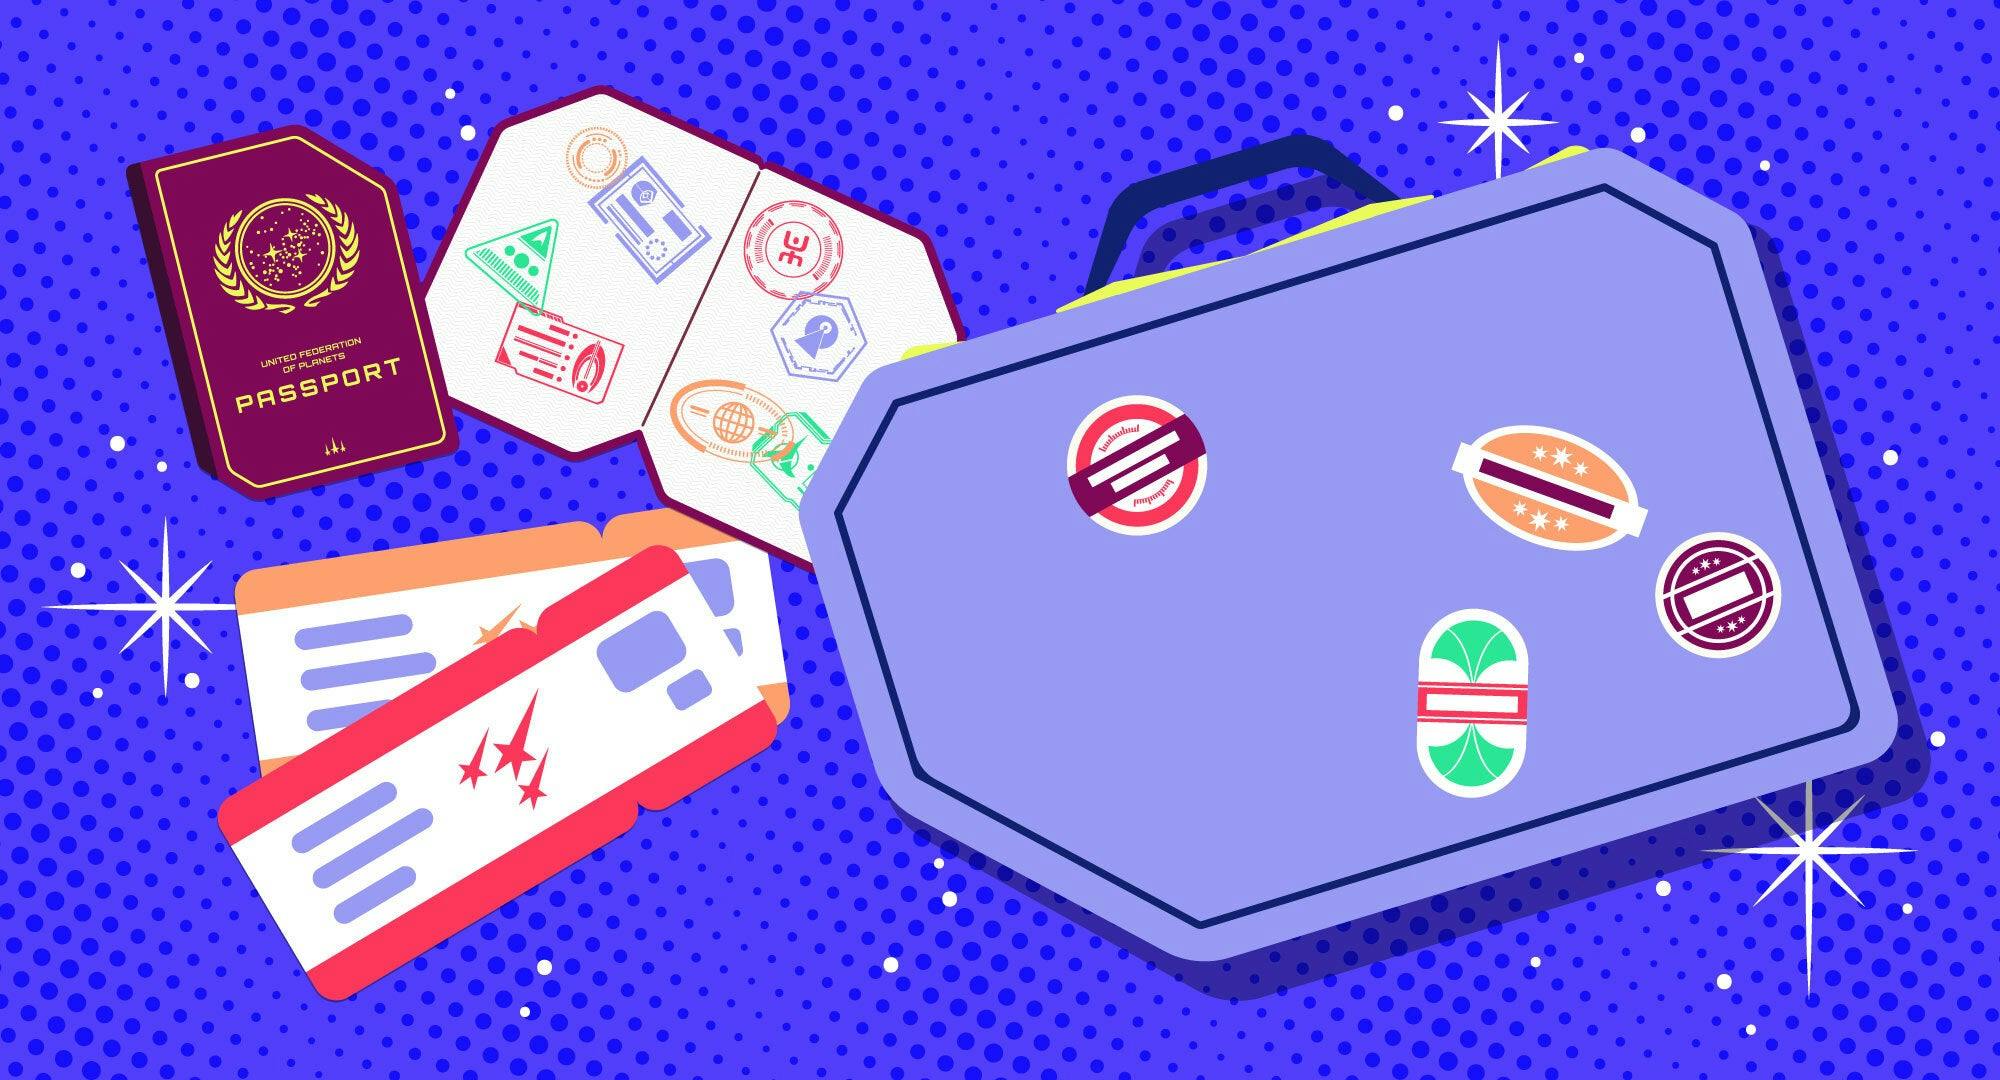 Illustrated banner featuring a suitcase with travel stickers on it, boarding tickets, and a Federation passport